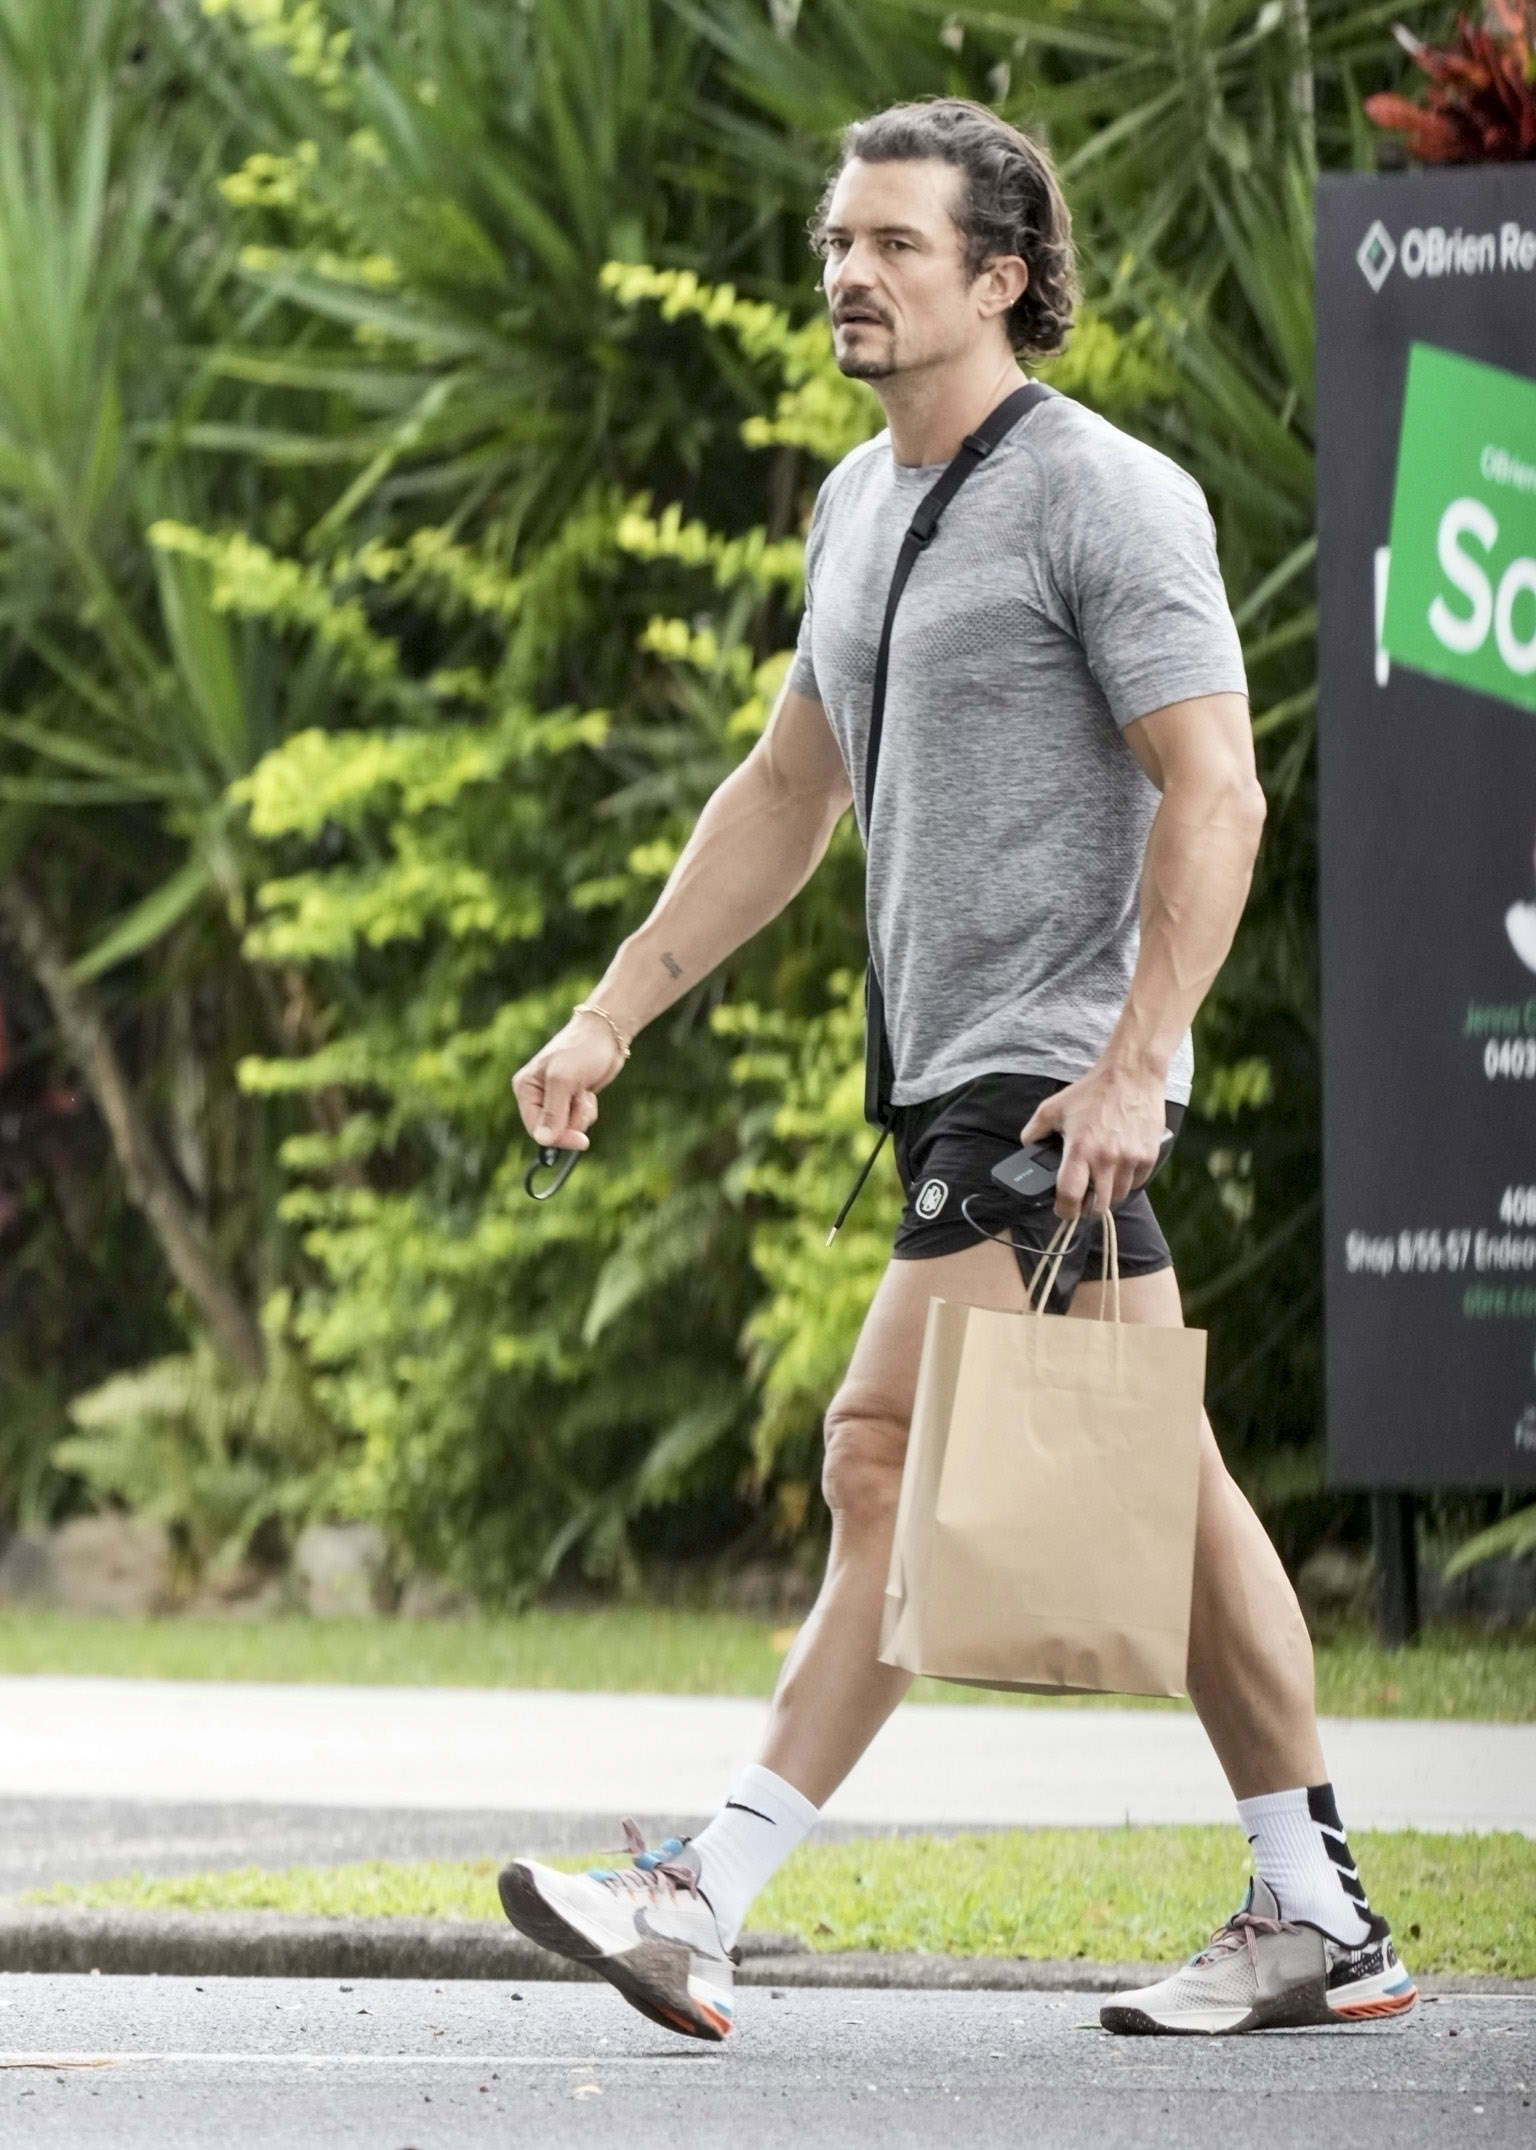 Orlando Bloom toured a market in Port Douglas, Australia, after training in a private gym.  He wore a sporty look with black shorts and a gray shirt.